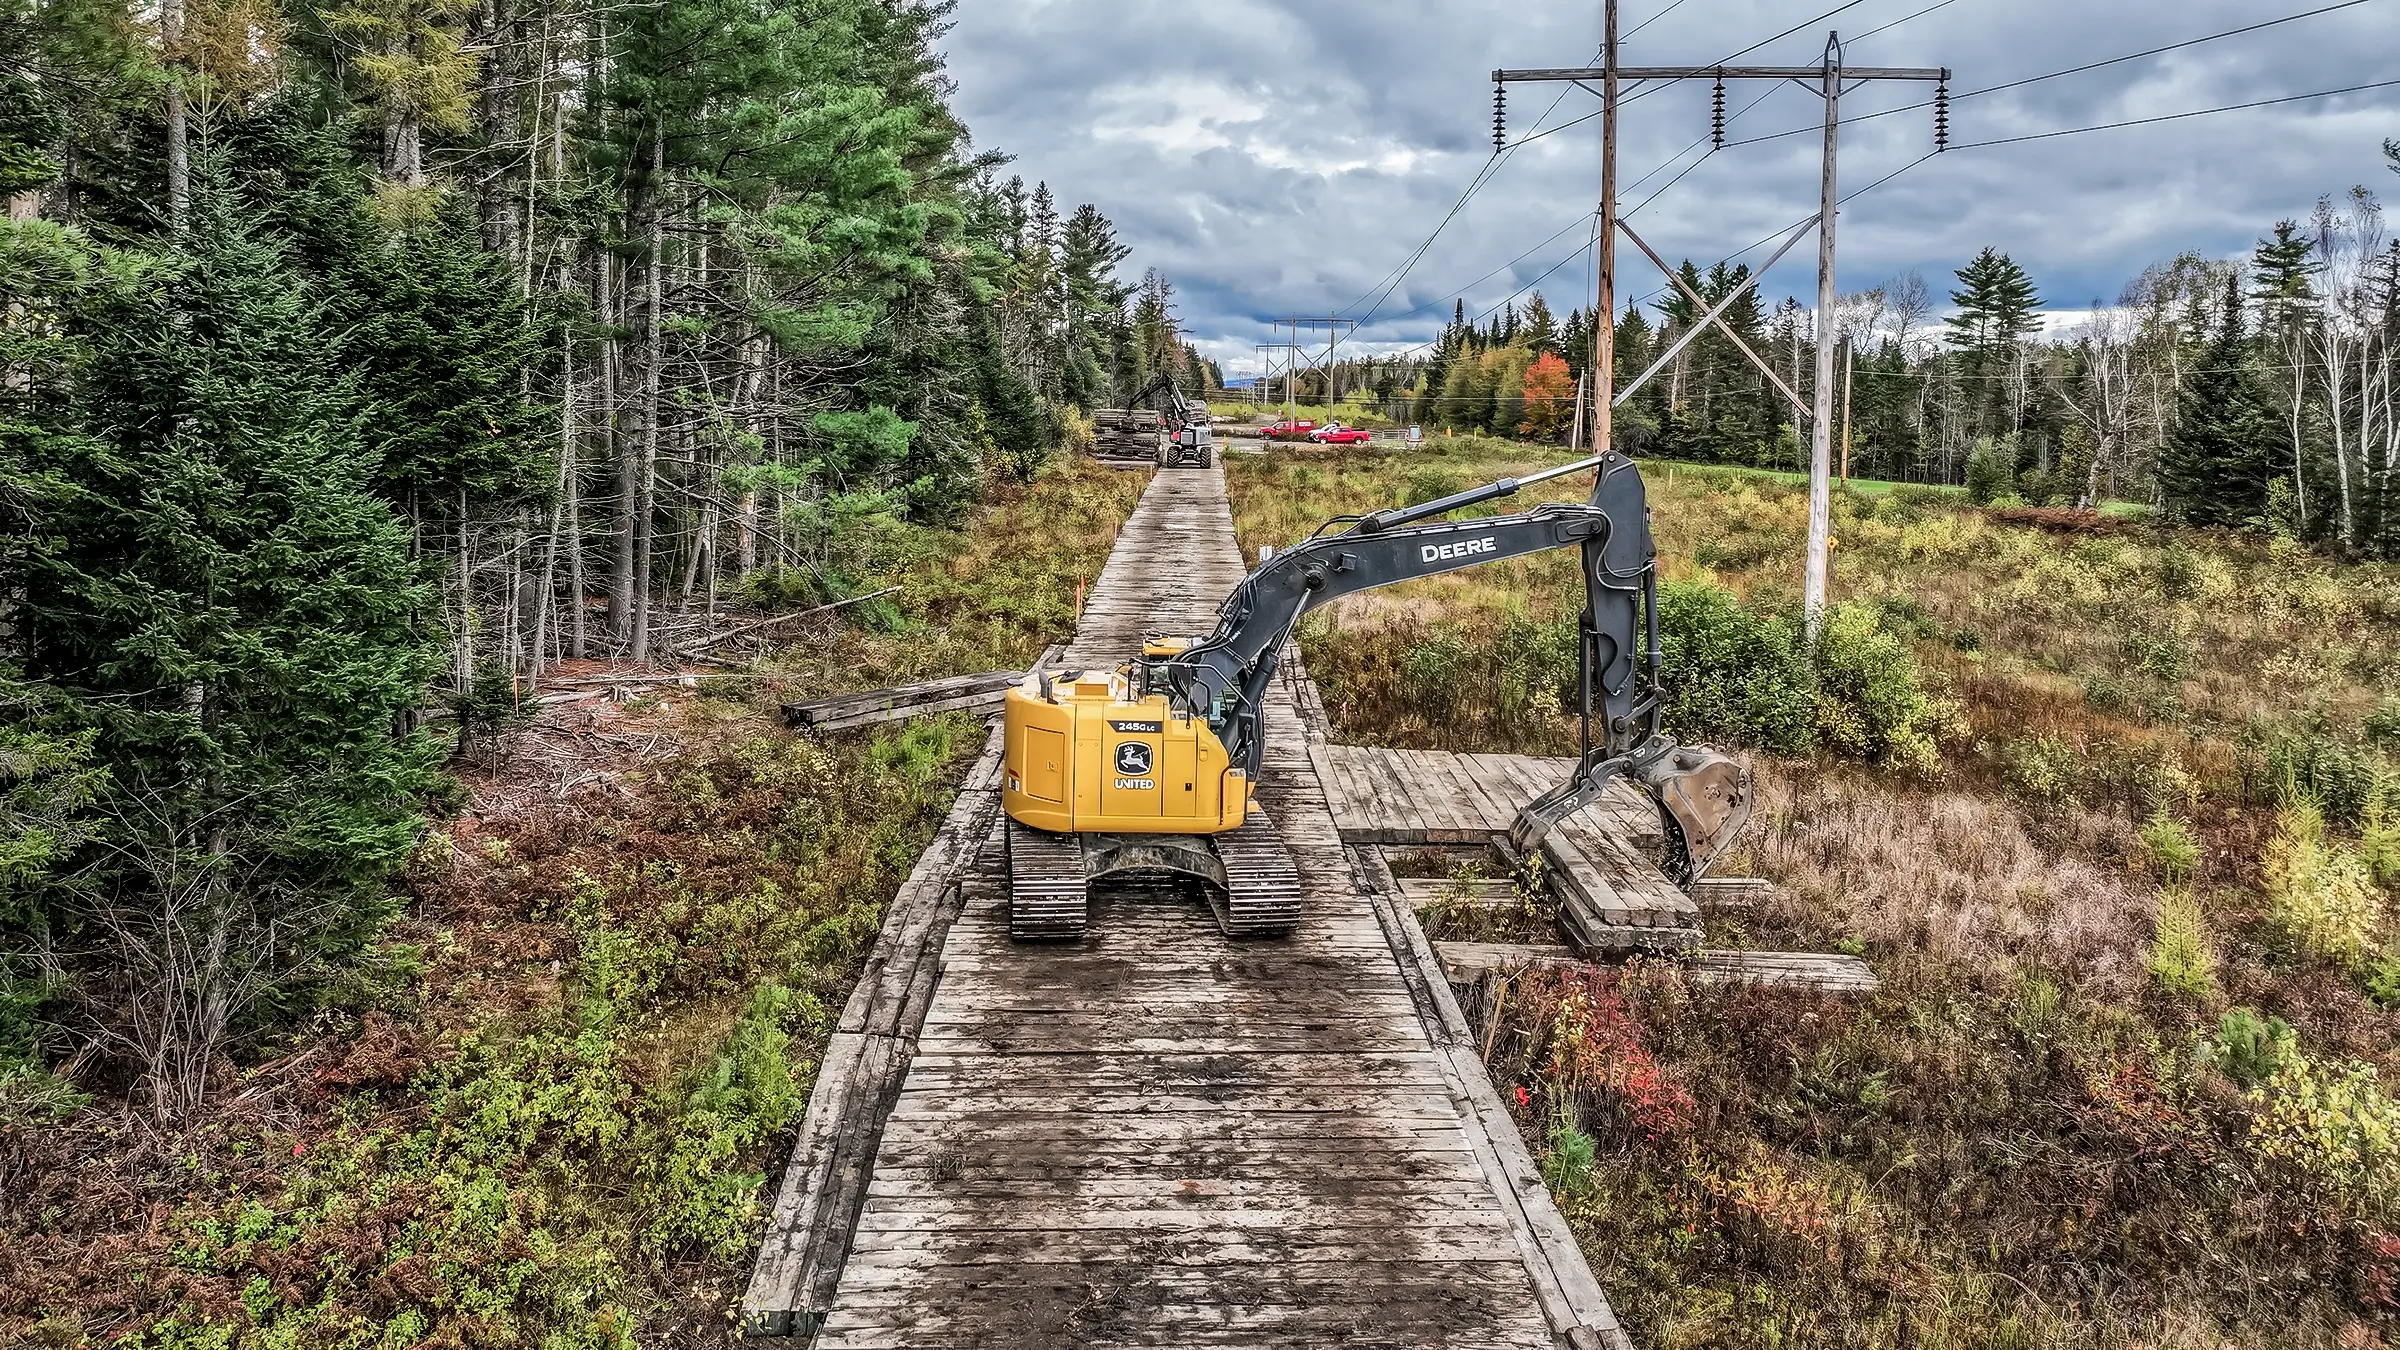 An excavator works along construction matting in a forest area.